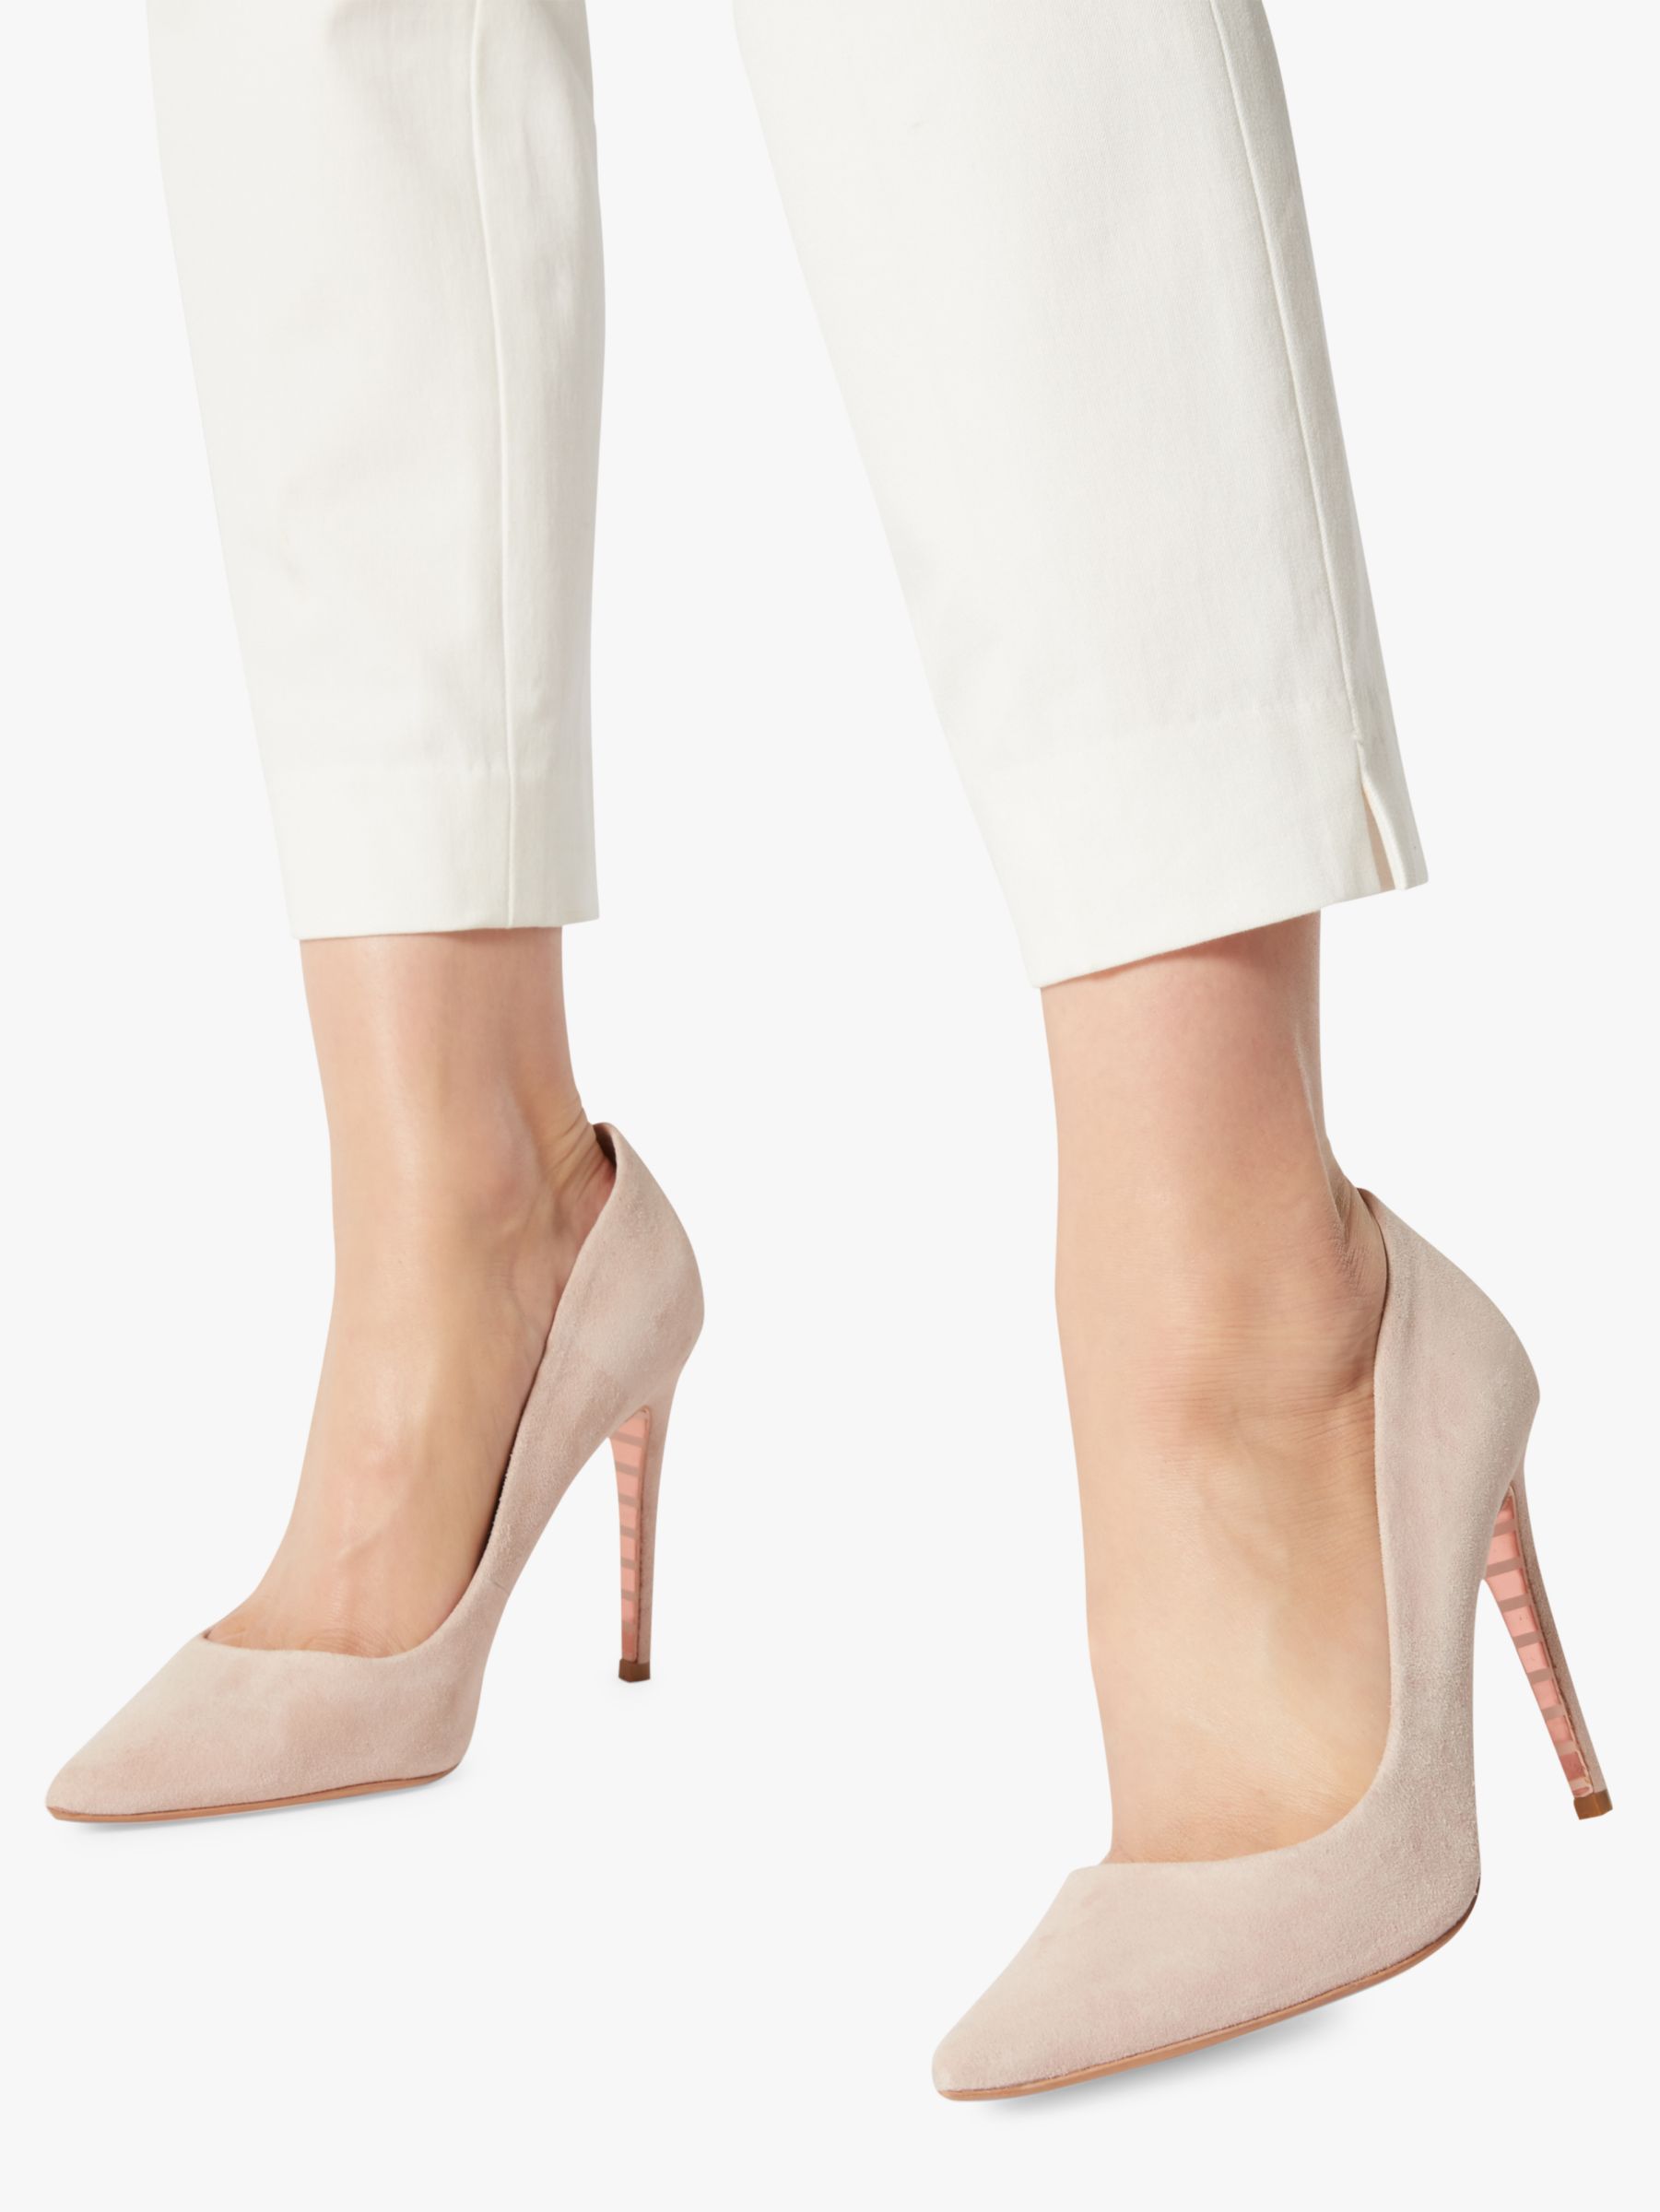 nude ombre shoes